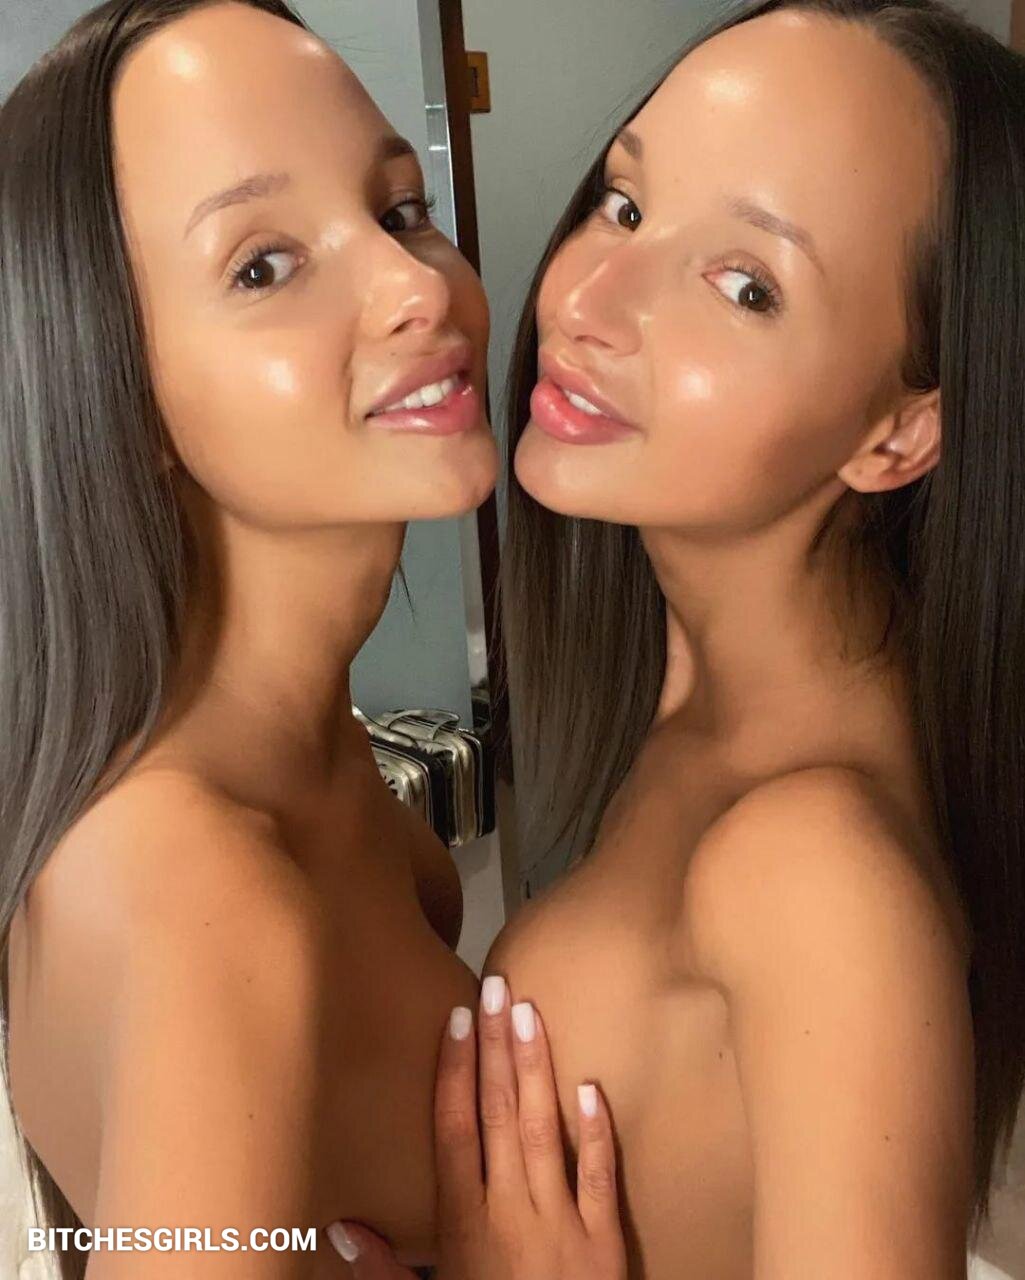 Twin Asian Girls Naked - Adelalinka Twins Nude - Collection Leaked Naked Videos